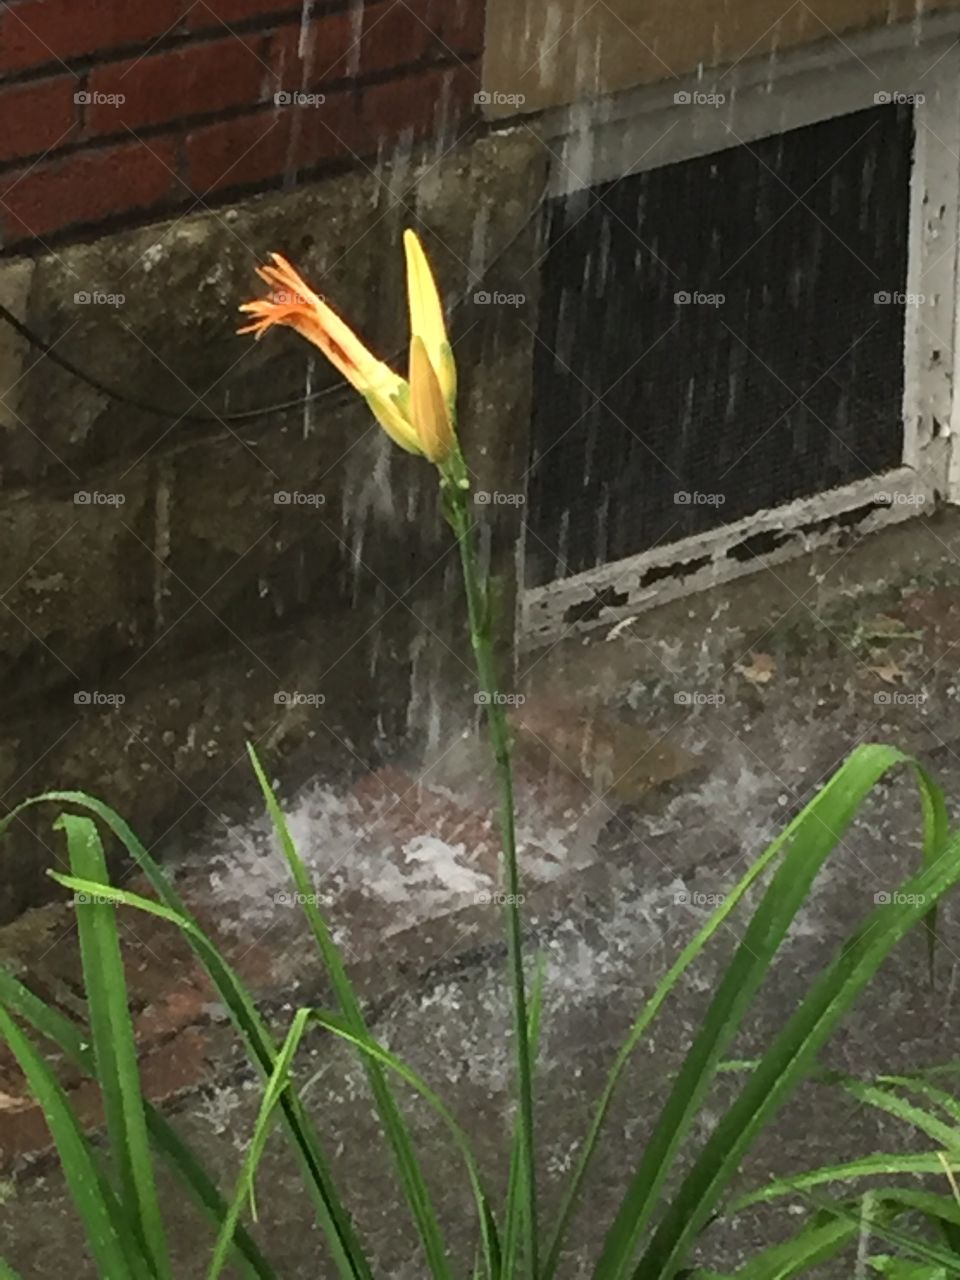 Wet day, even for flowers.